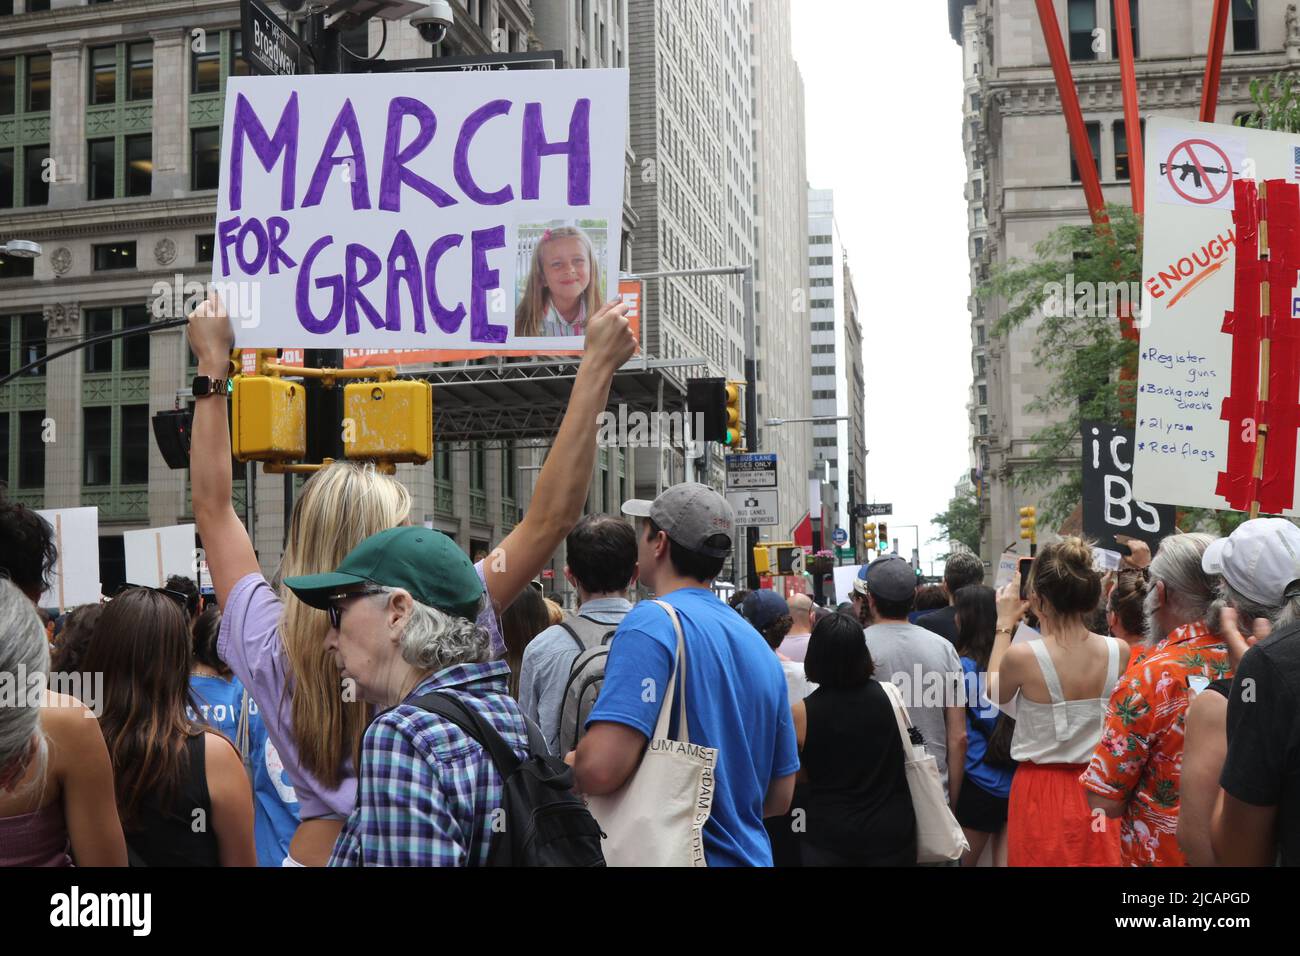 March for Our Lives 2022, New York, NY USA Stock Photo